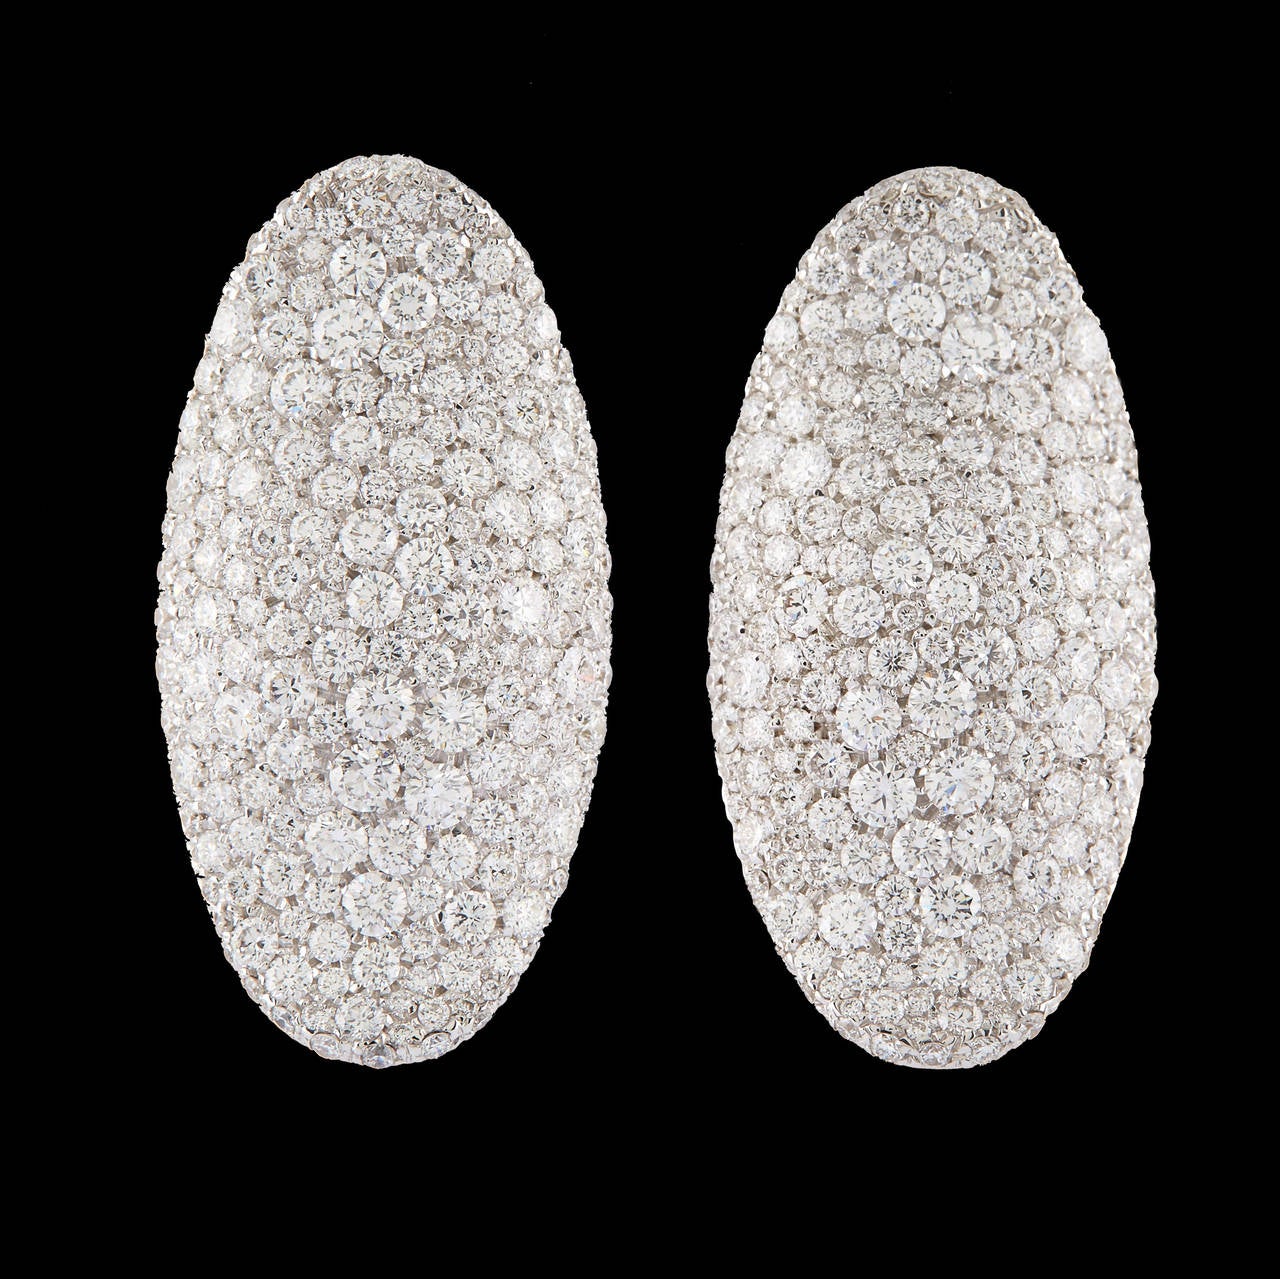 Palmiero Contemporary 18Kt White Gold Earrings Feature 6.23 Carat Total Weight of Pavé Set F Color and VVS1 Clarity Diamonds. These Italian made earrings measure 32mm long and 16mm wide. Together they weigh 13.2 grams.